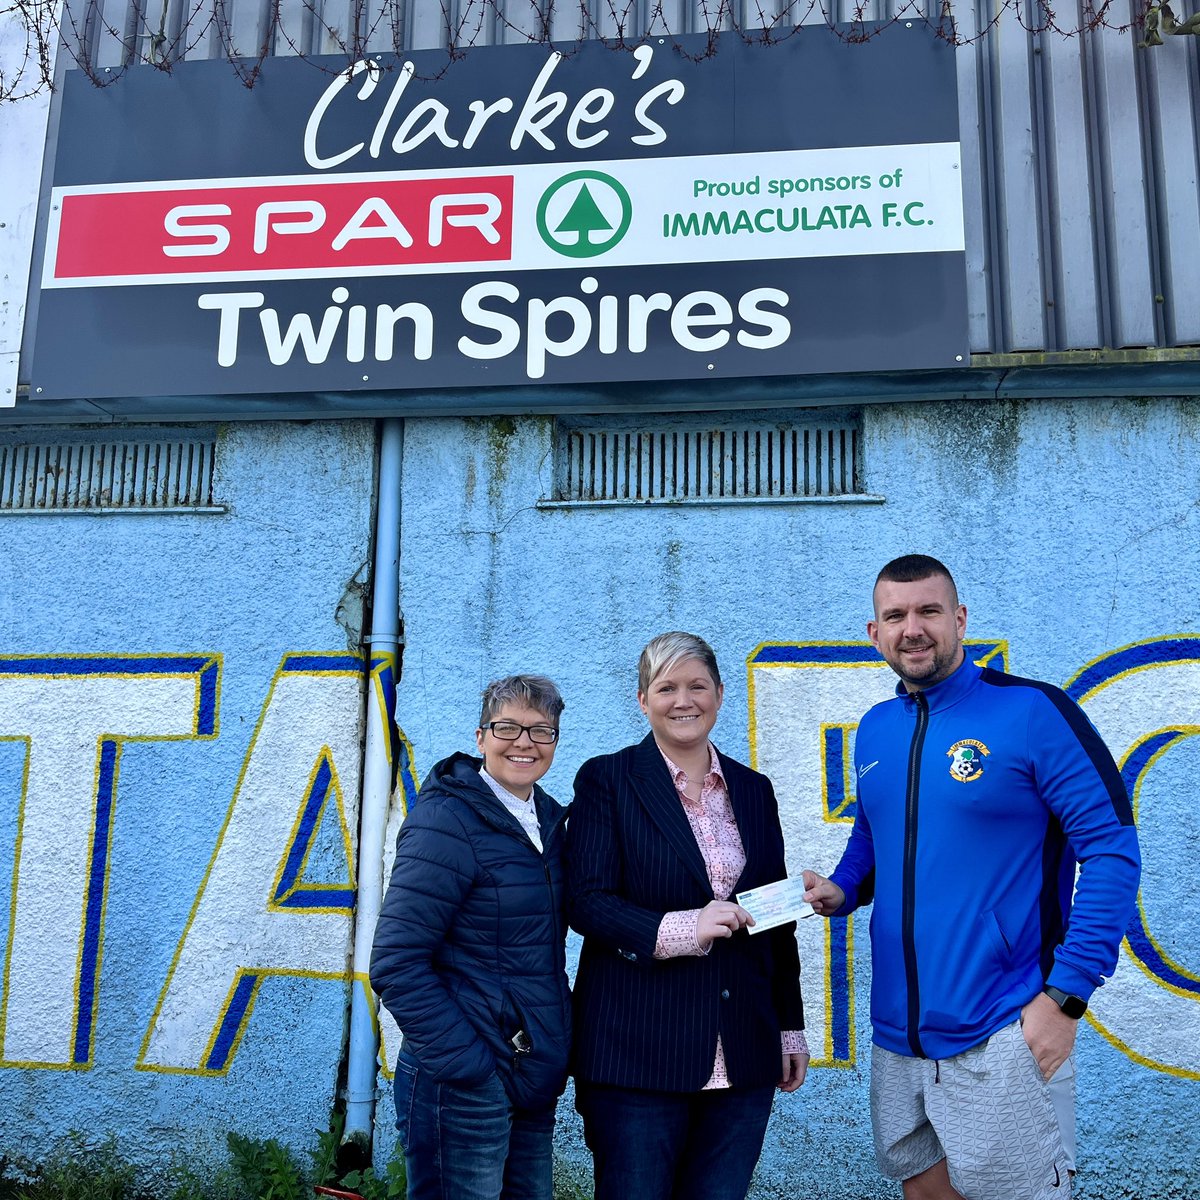 A huge thanks to Spar Twin Spires for their continued sponsorship of our club. We are so grateful for their support - what an asset they are to our community! #GOTM 💙